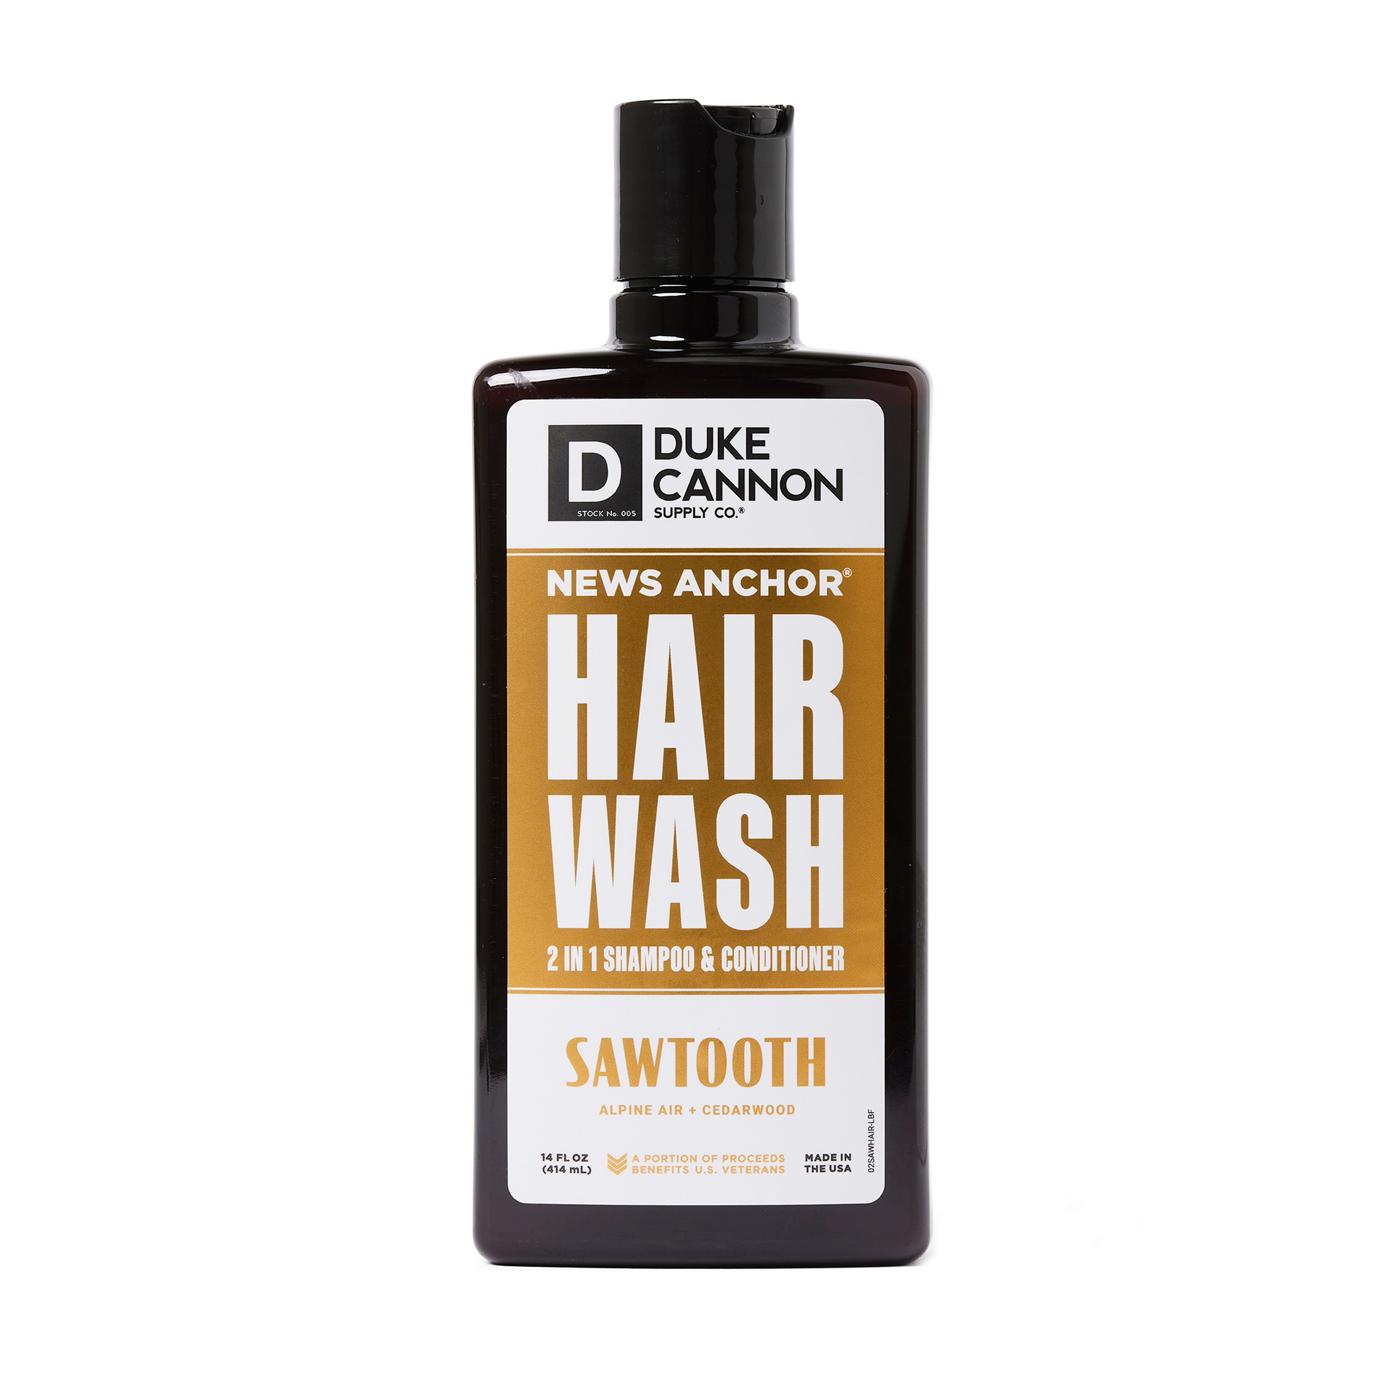 Duke Cannon 2 in 1 Shampoo & Conditioner - Sawtooth; image 1 of 3